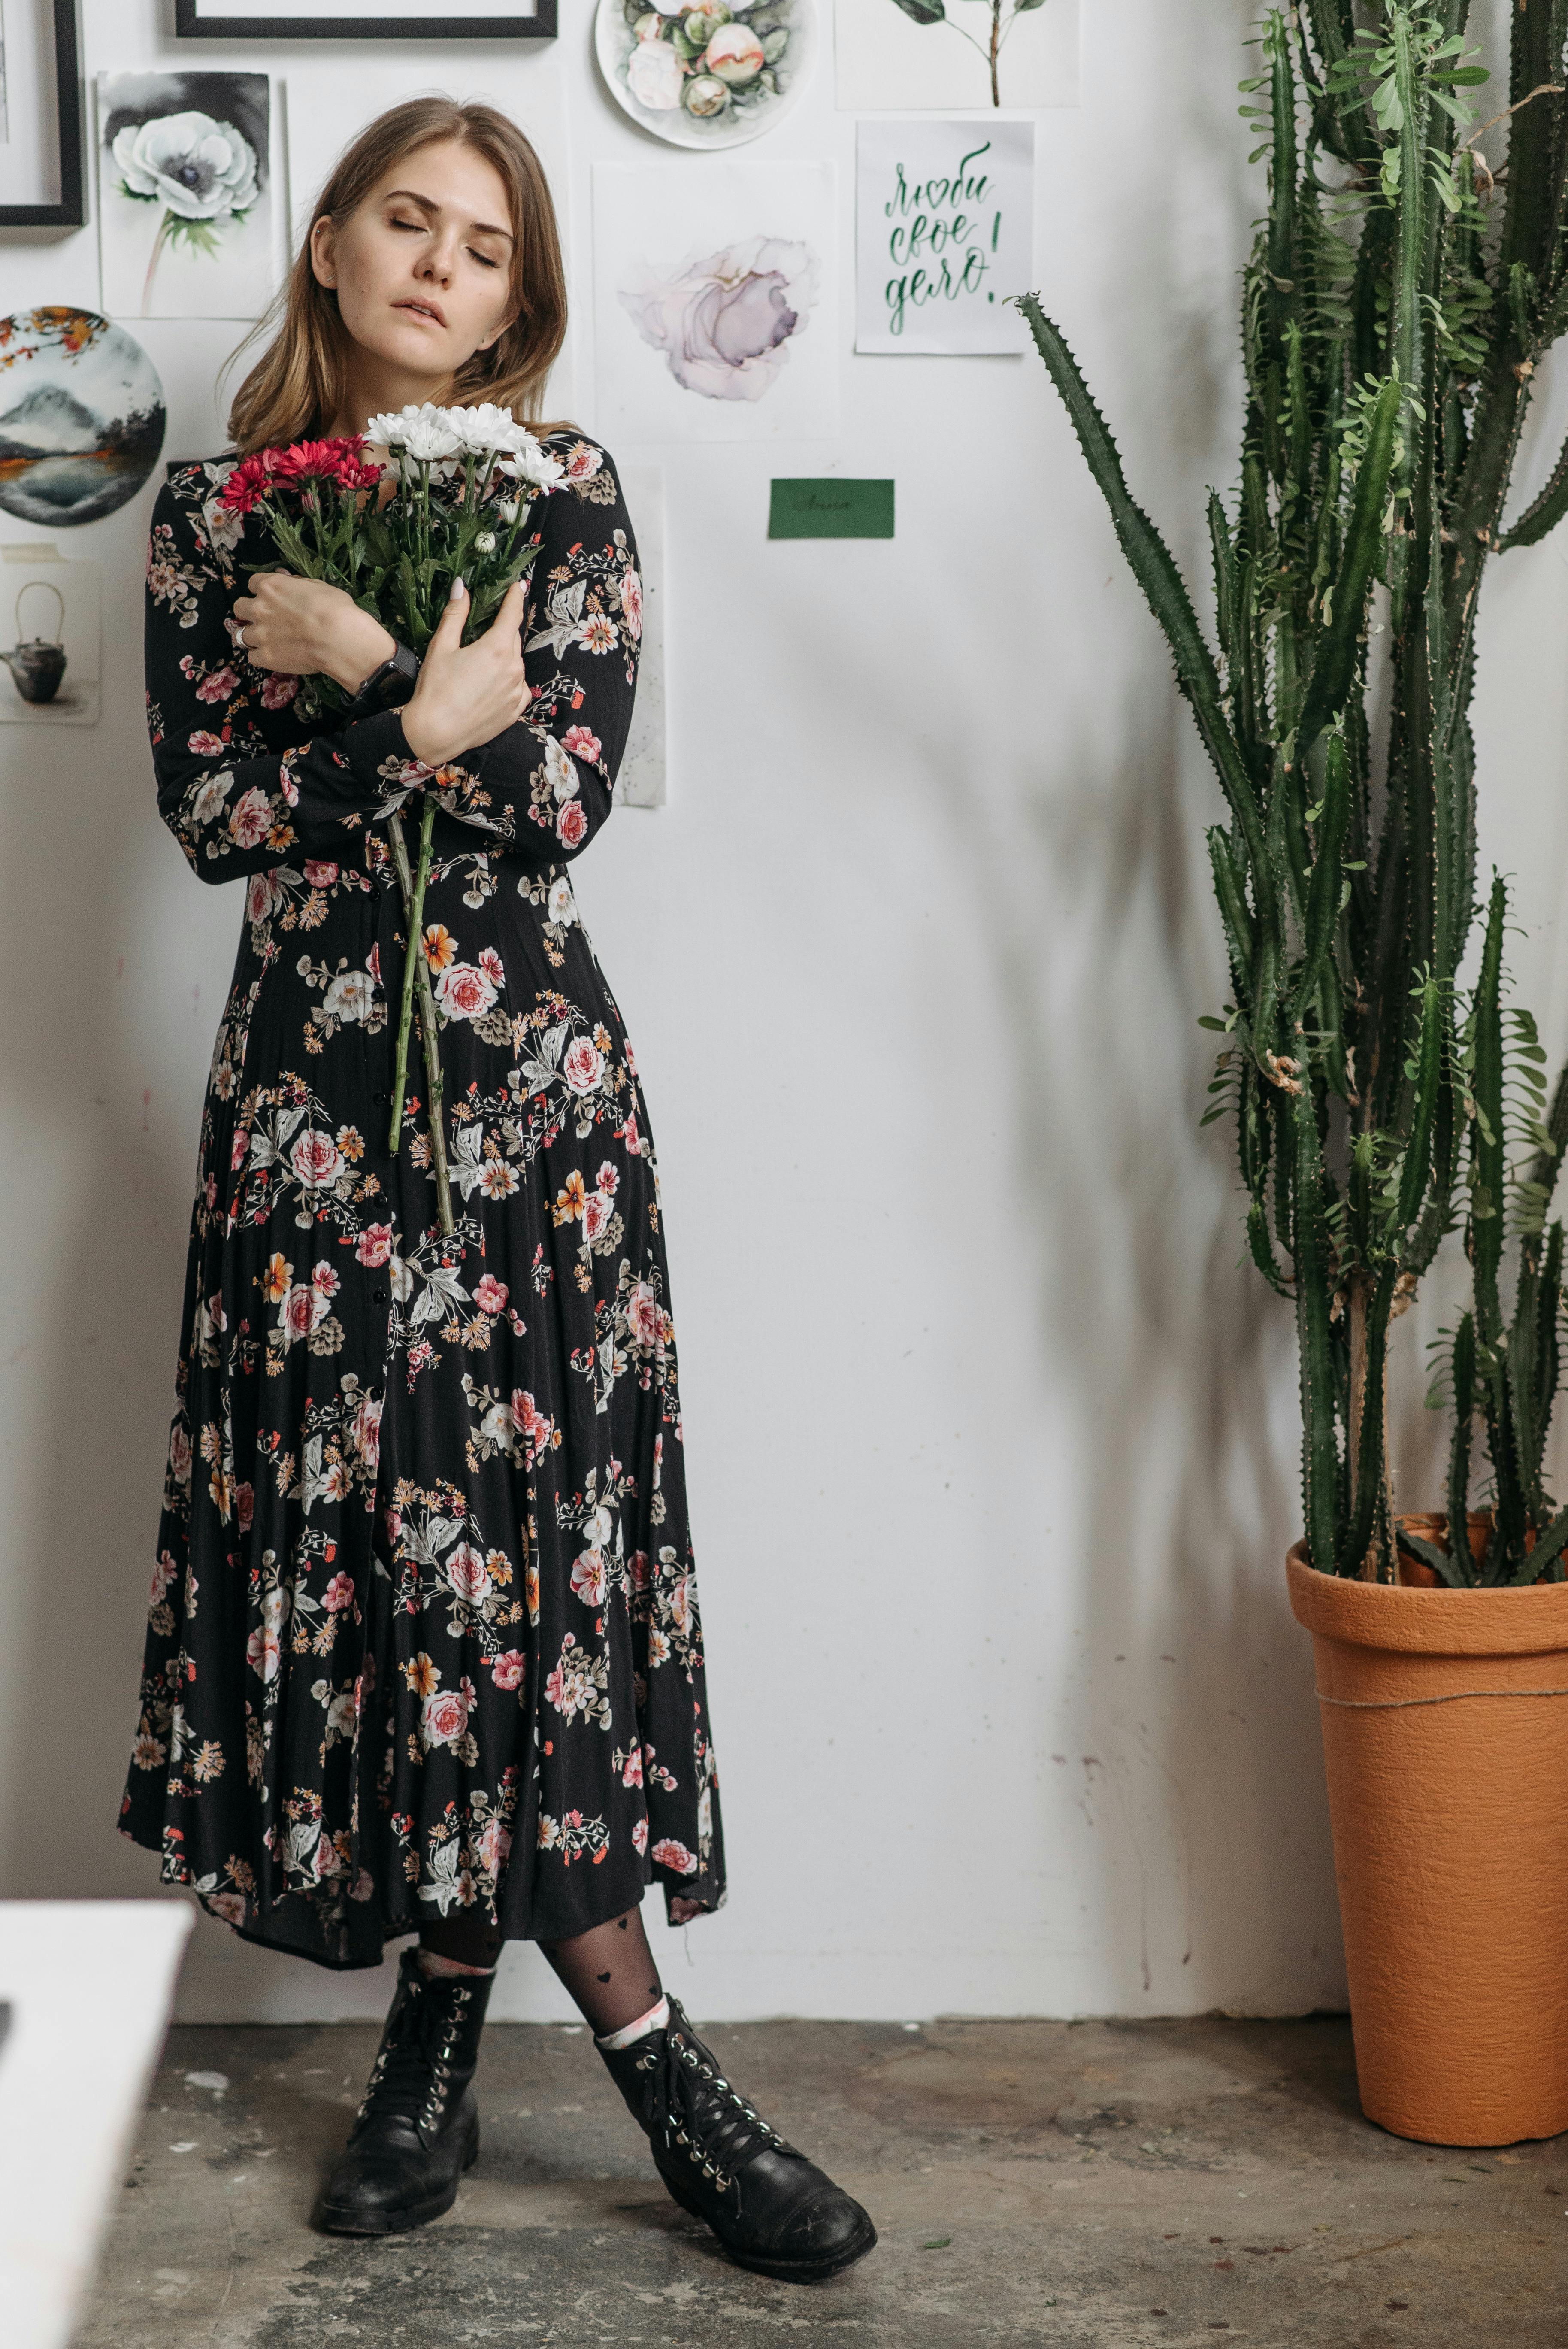 woman in black floral dress standing beside cactus plant